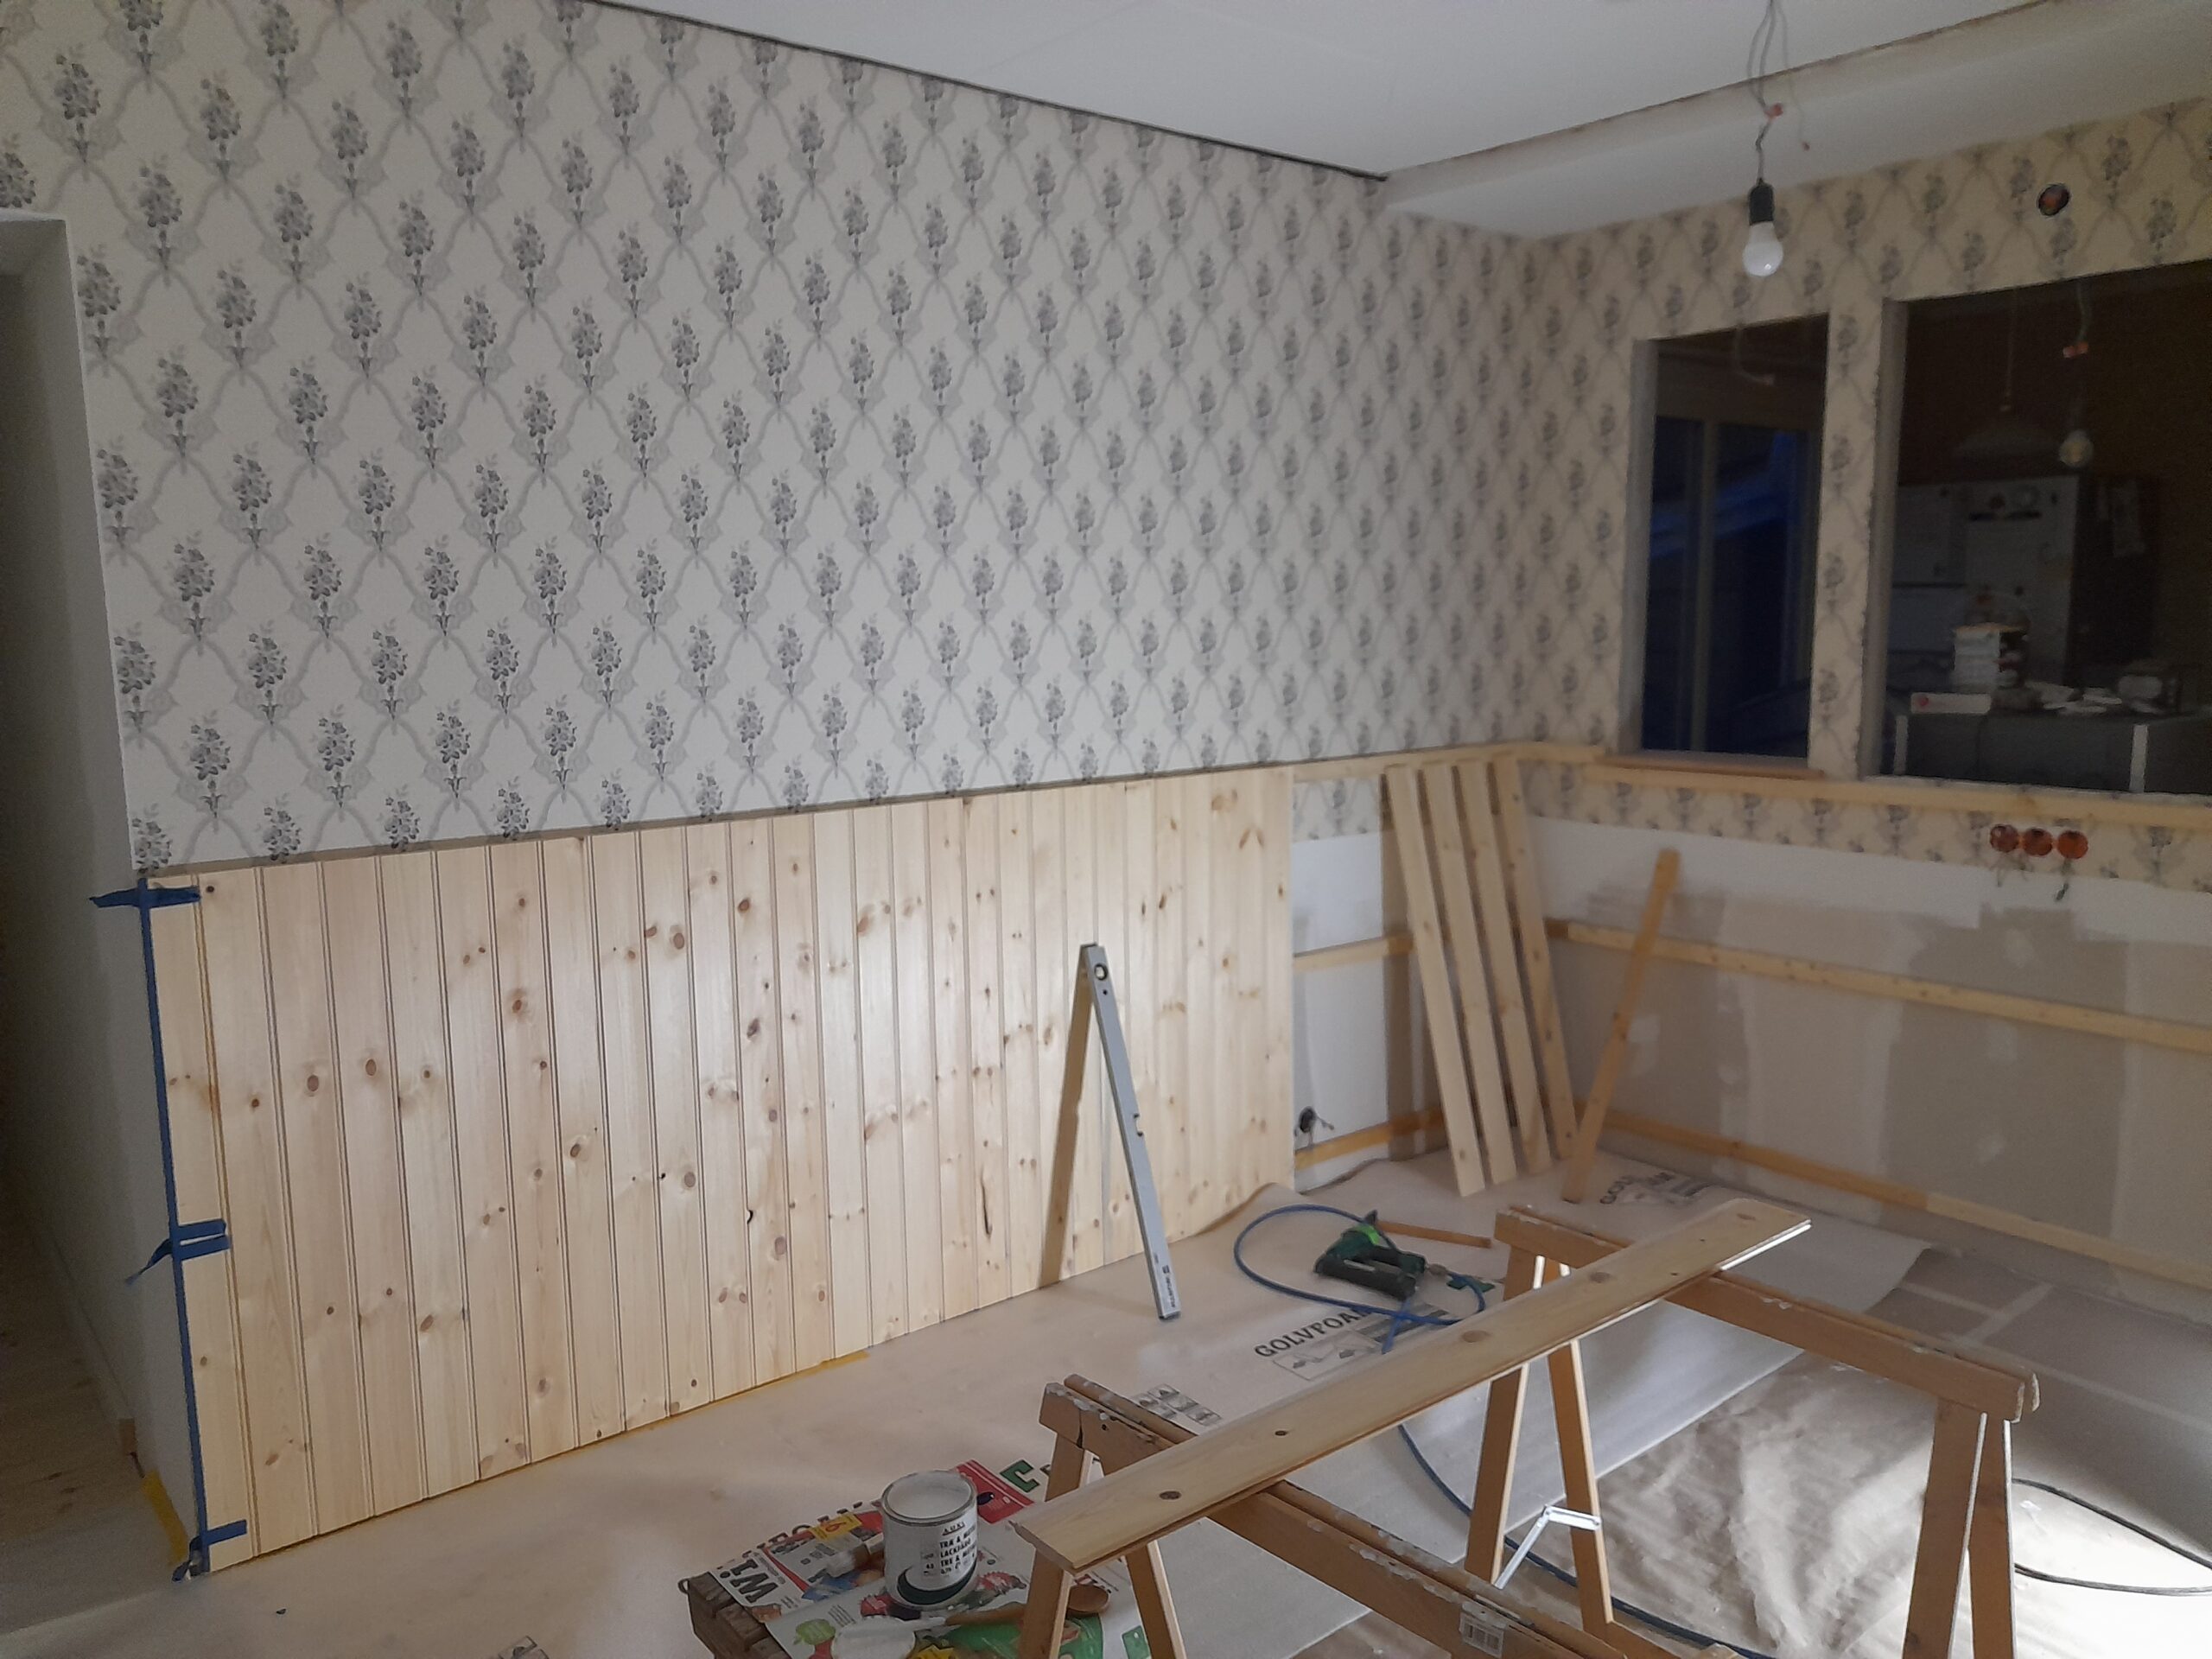 wood-panelling-preparation-and-wallpapering-osbytsm